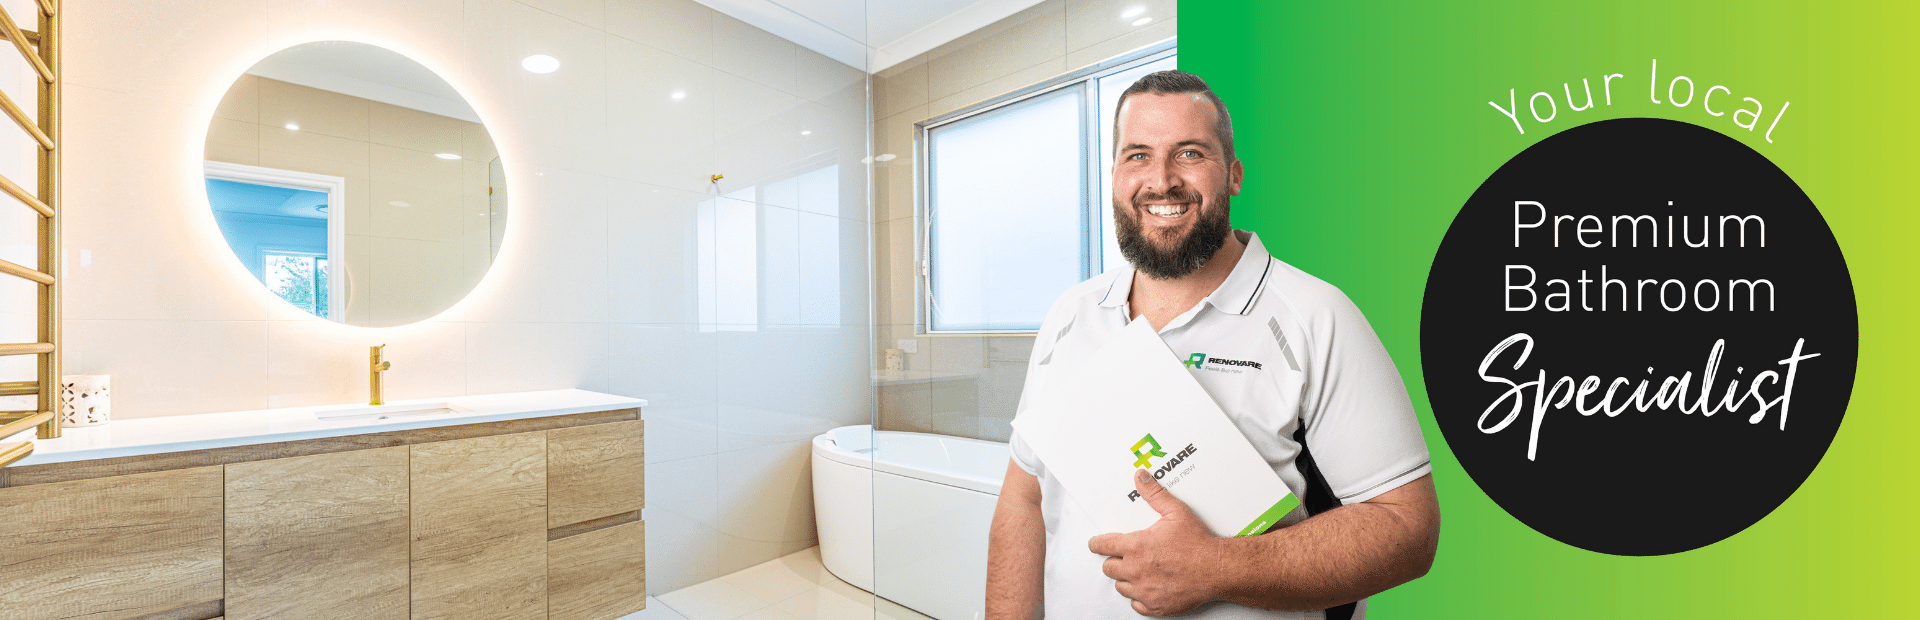 Joe smiling holding Renovare documents | featured image for Home.